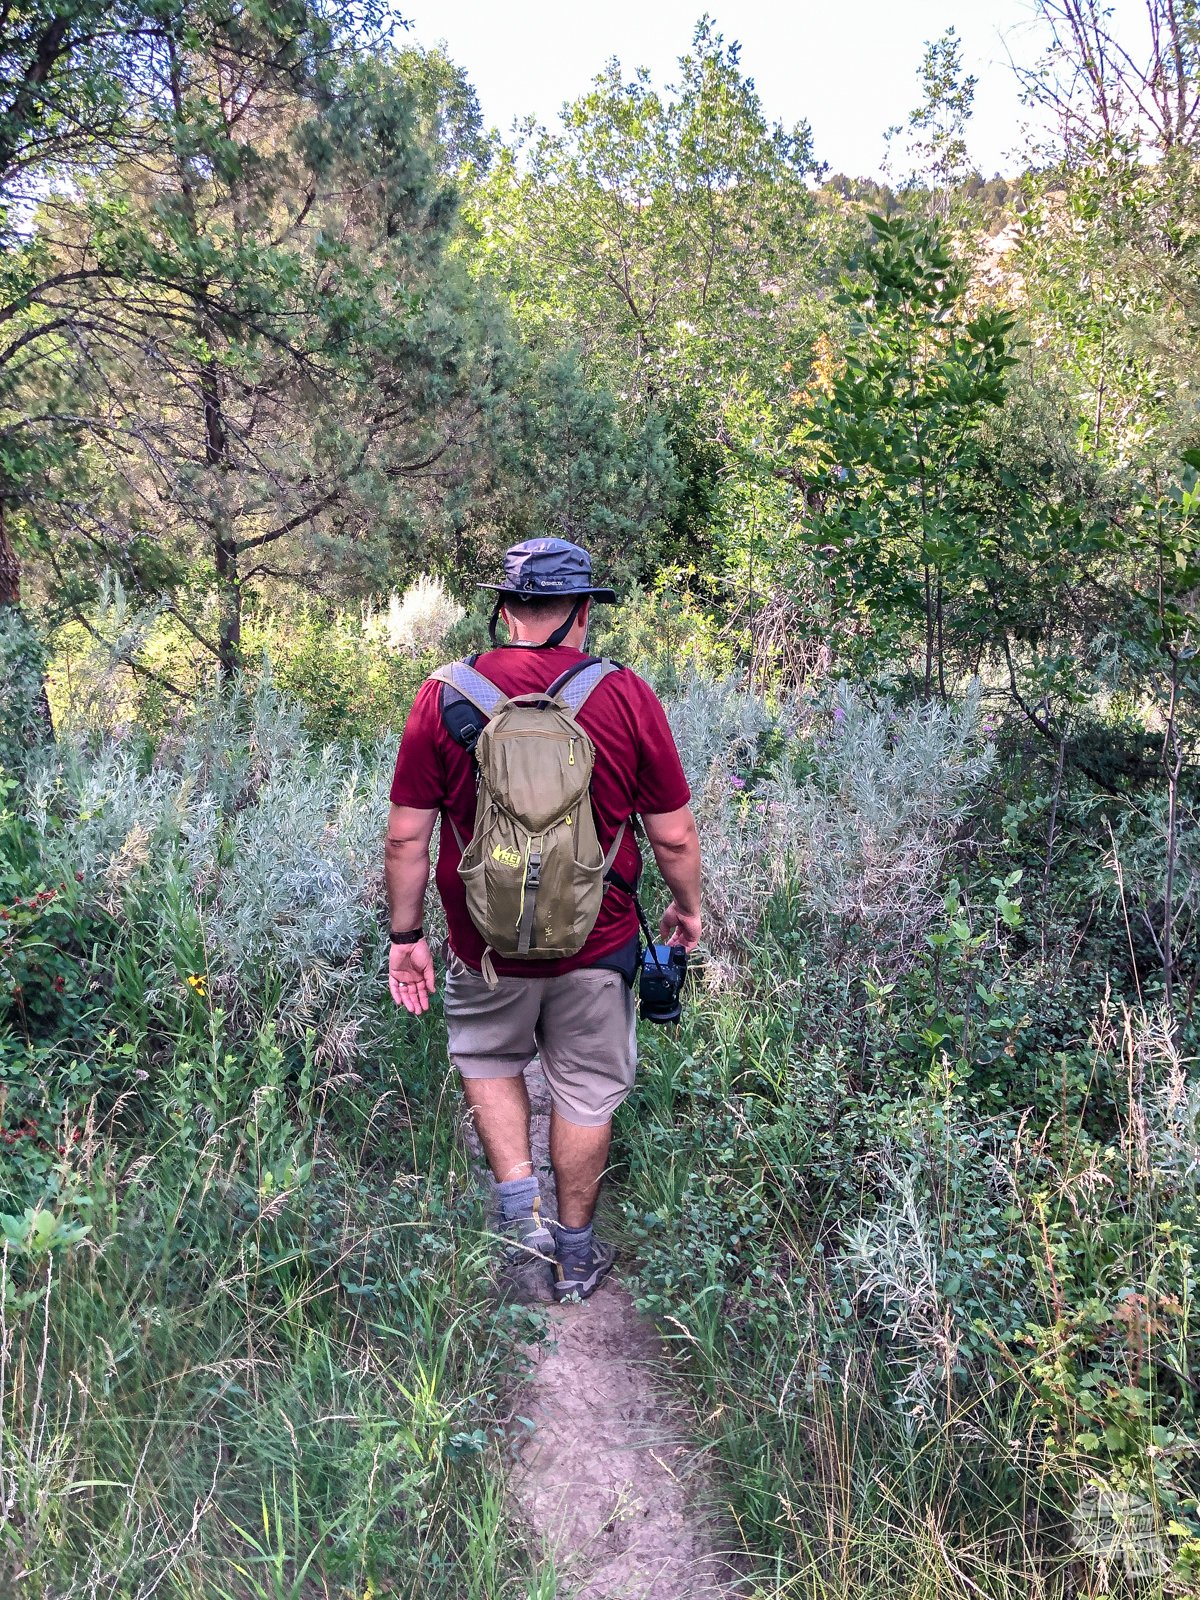 Grant hiking through thicker brush on the Caprock Coulee Trail.